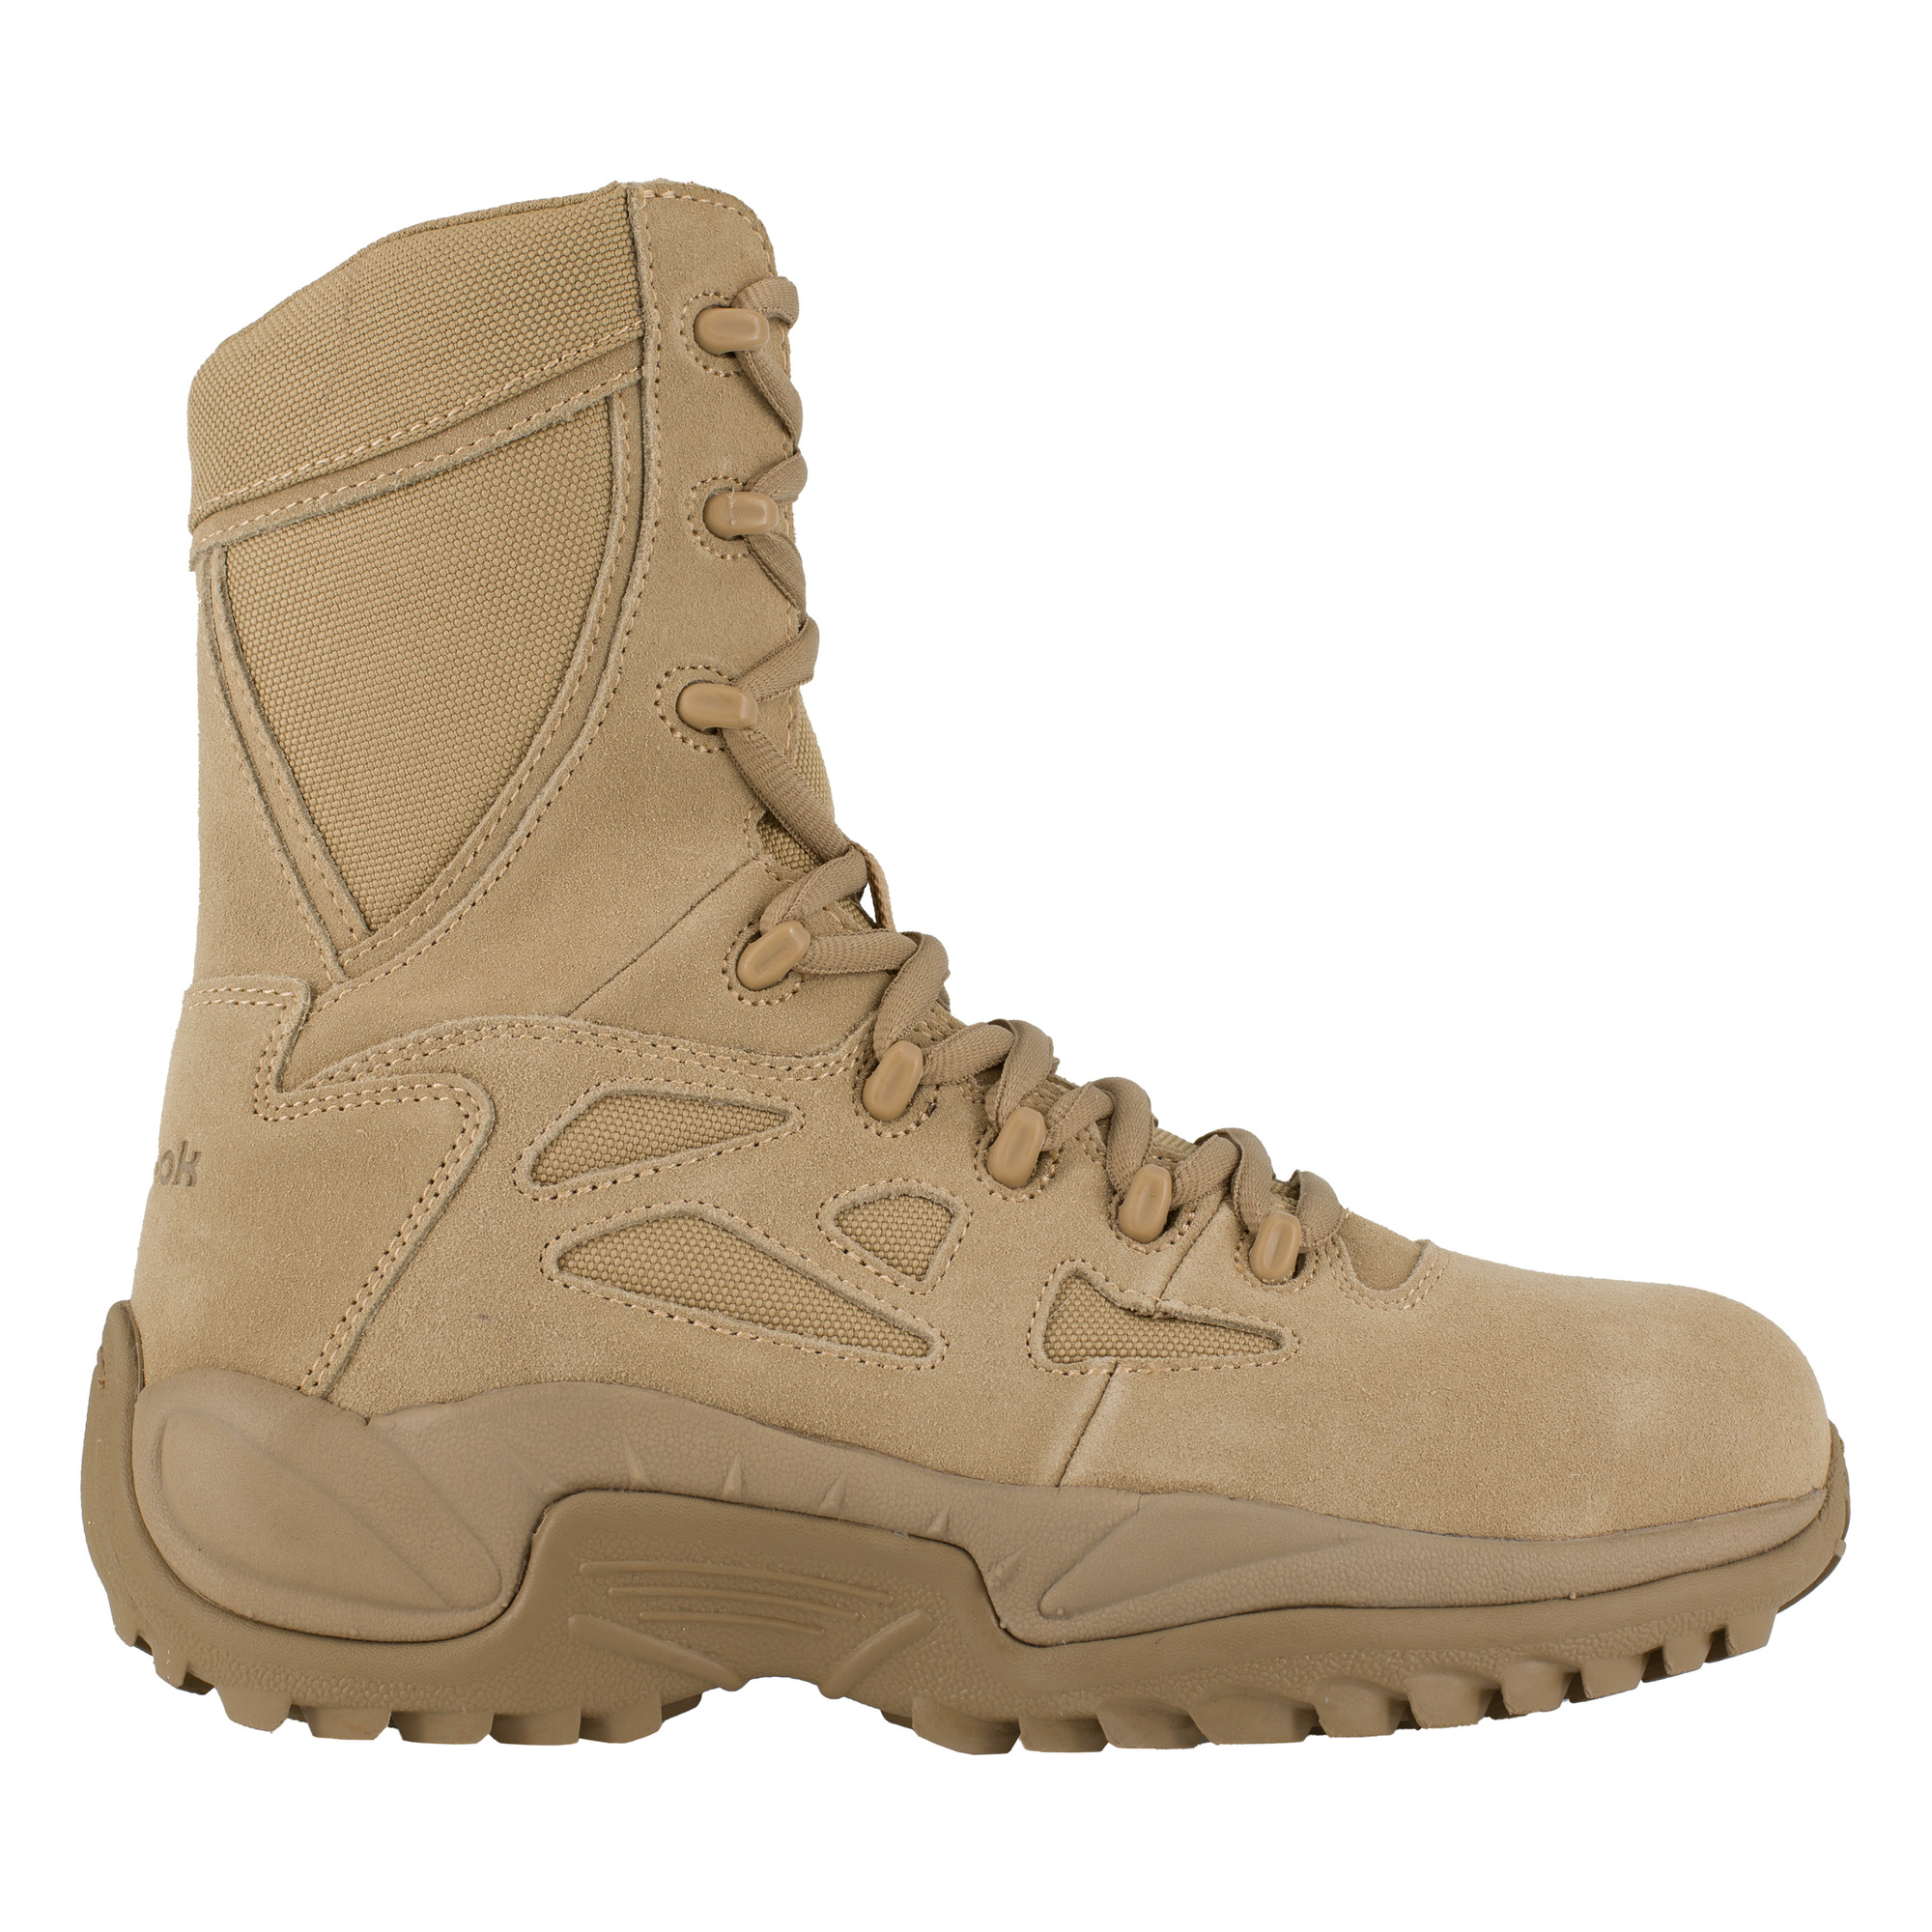 Reebok, 8Inch Stealth Tactical Boot with Side Zipper, Size 11, Width Wide, Color Desert Tan, Model RB894 -  RB894-W-11.0